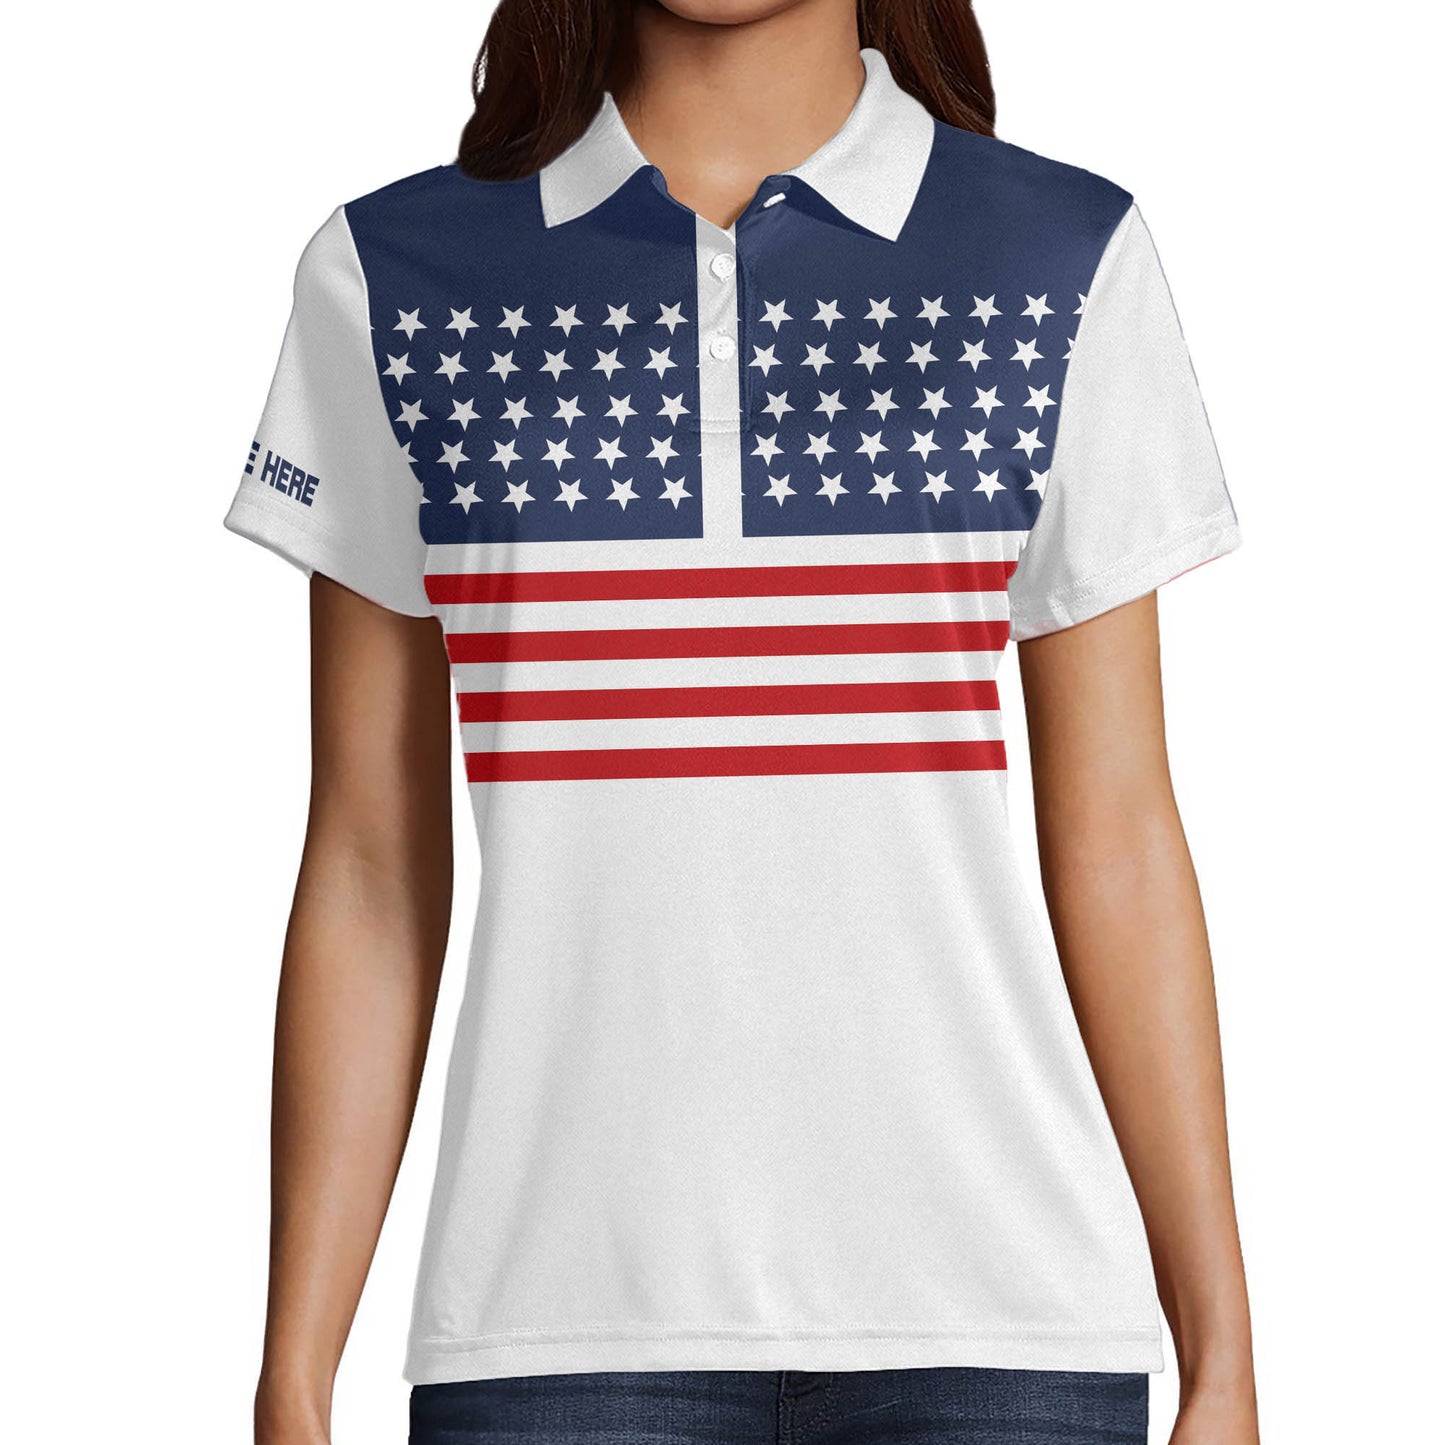 Your Hold is My Goal Golf Polo Shirt GW0016